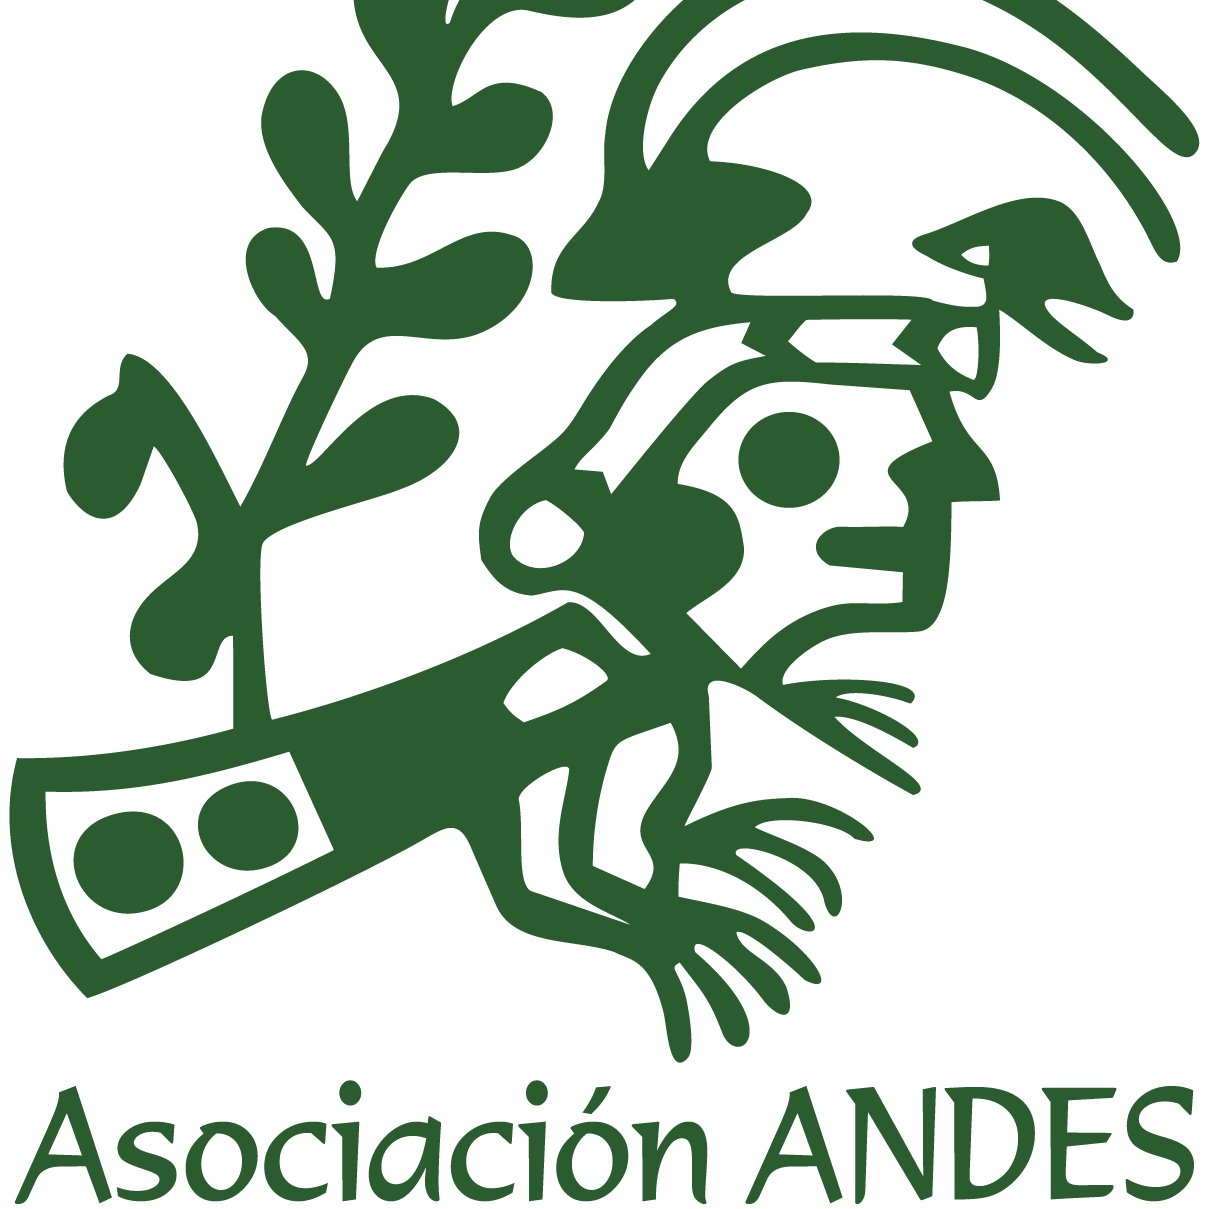 ANDES is a non-profit association involved in the recognition and strengthening of communal traditional rights on biocultural resources.